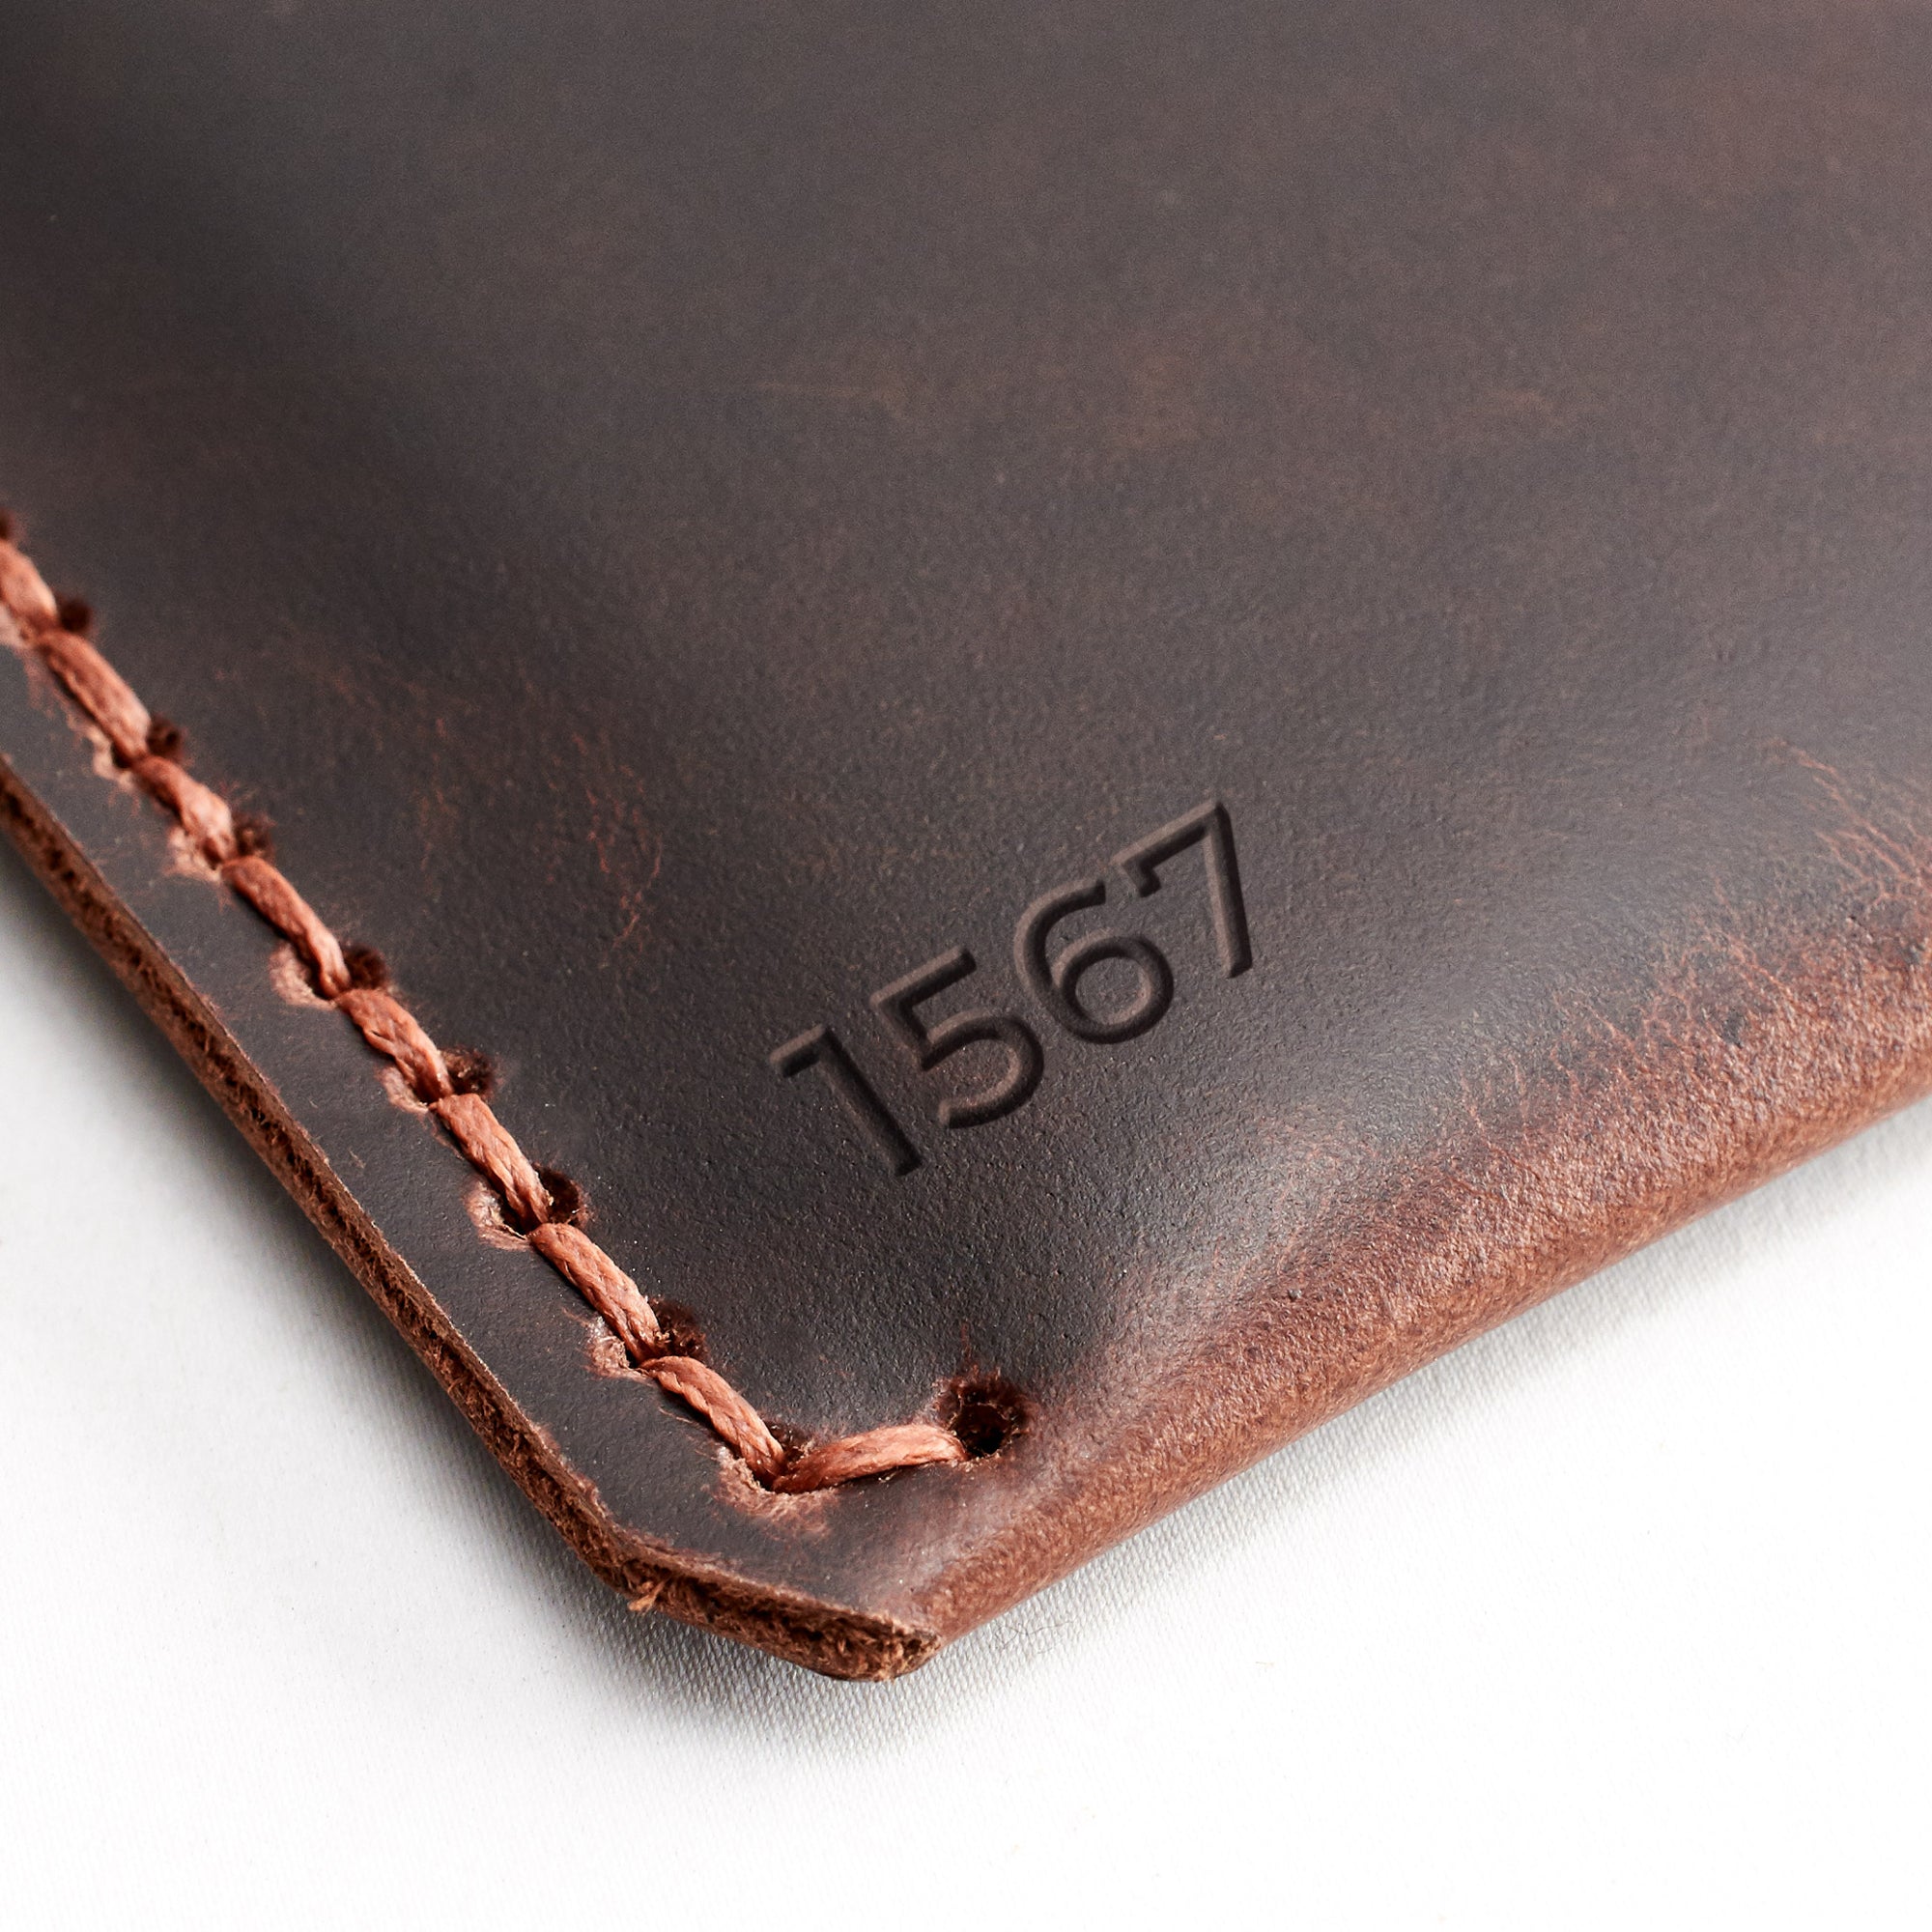 Custom engraving. Red Brown handcrafted leather reMarkable tablet case. Folio with Marker holder. Paper E-ink tablet minimalist sleeve design. 